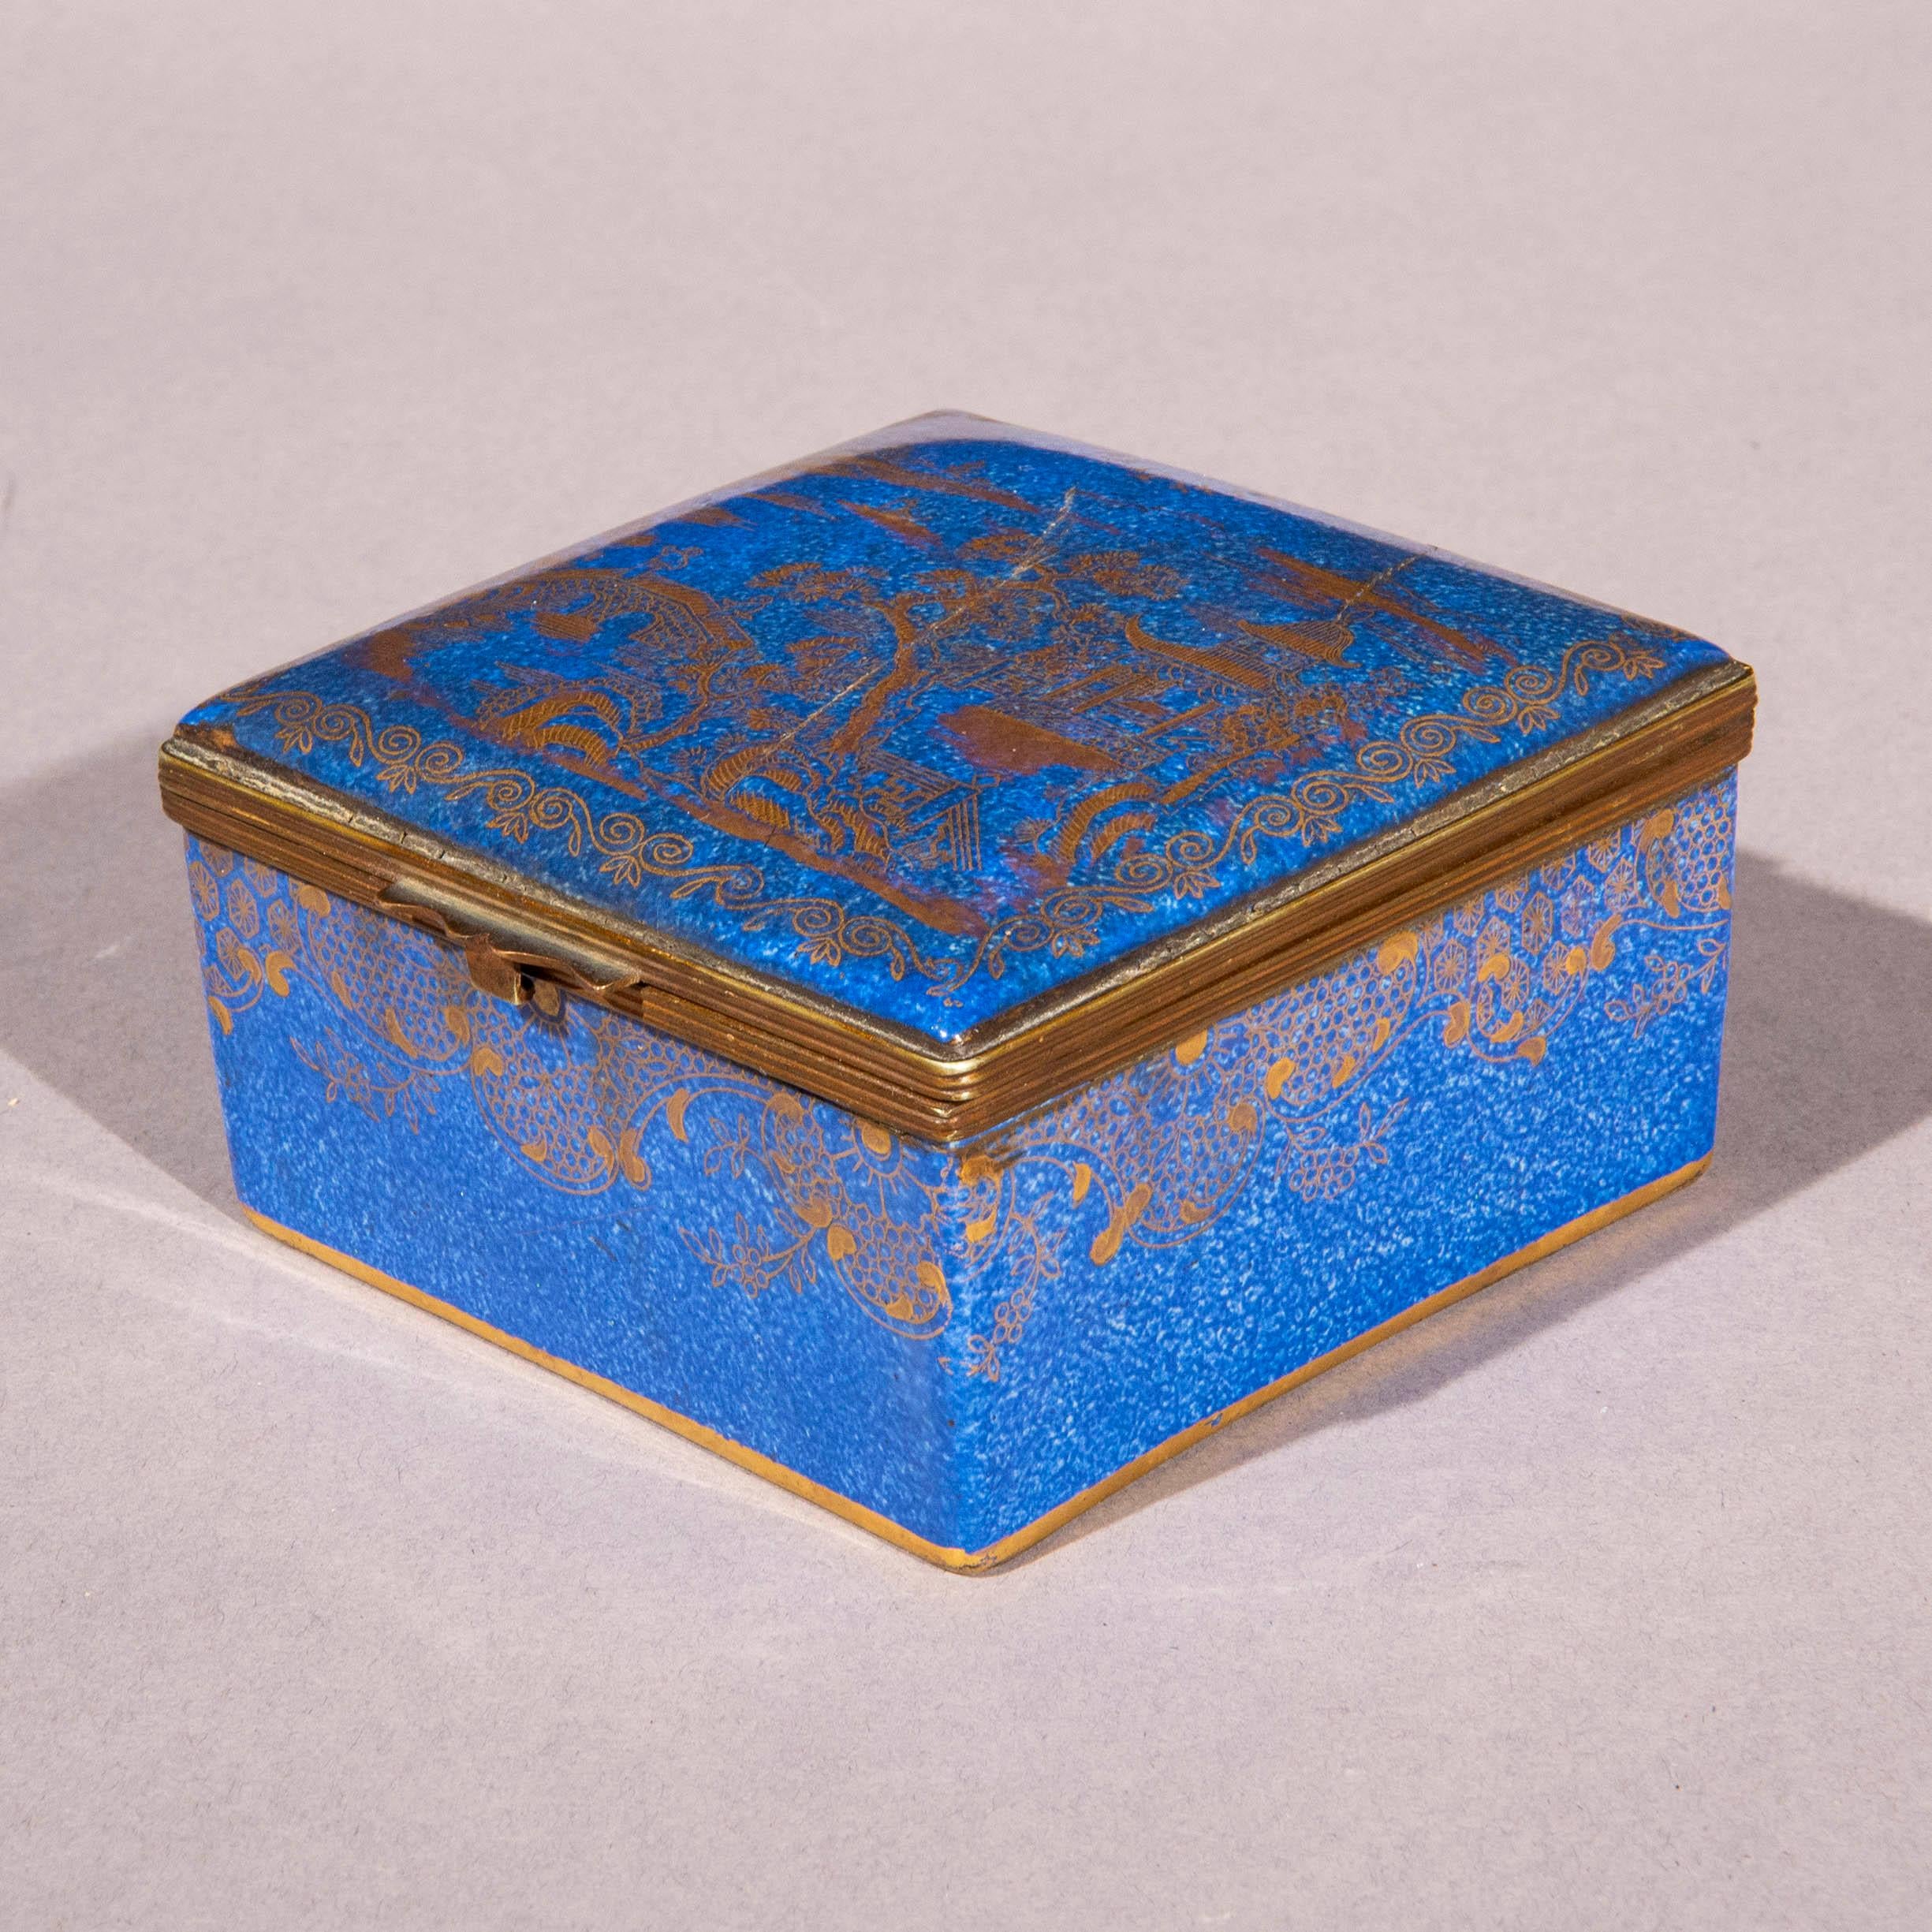 Antique Chinoiserie Blue Staffordshire Porcelain Box In Distressed Condition For Sale In Richmond, London